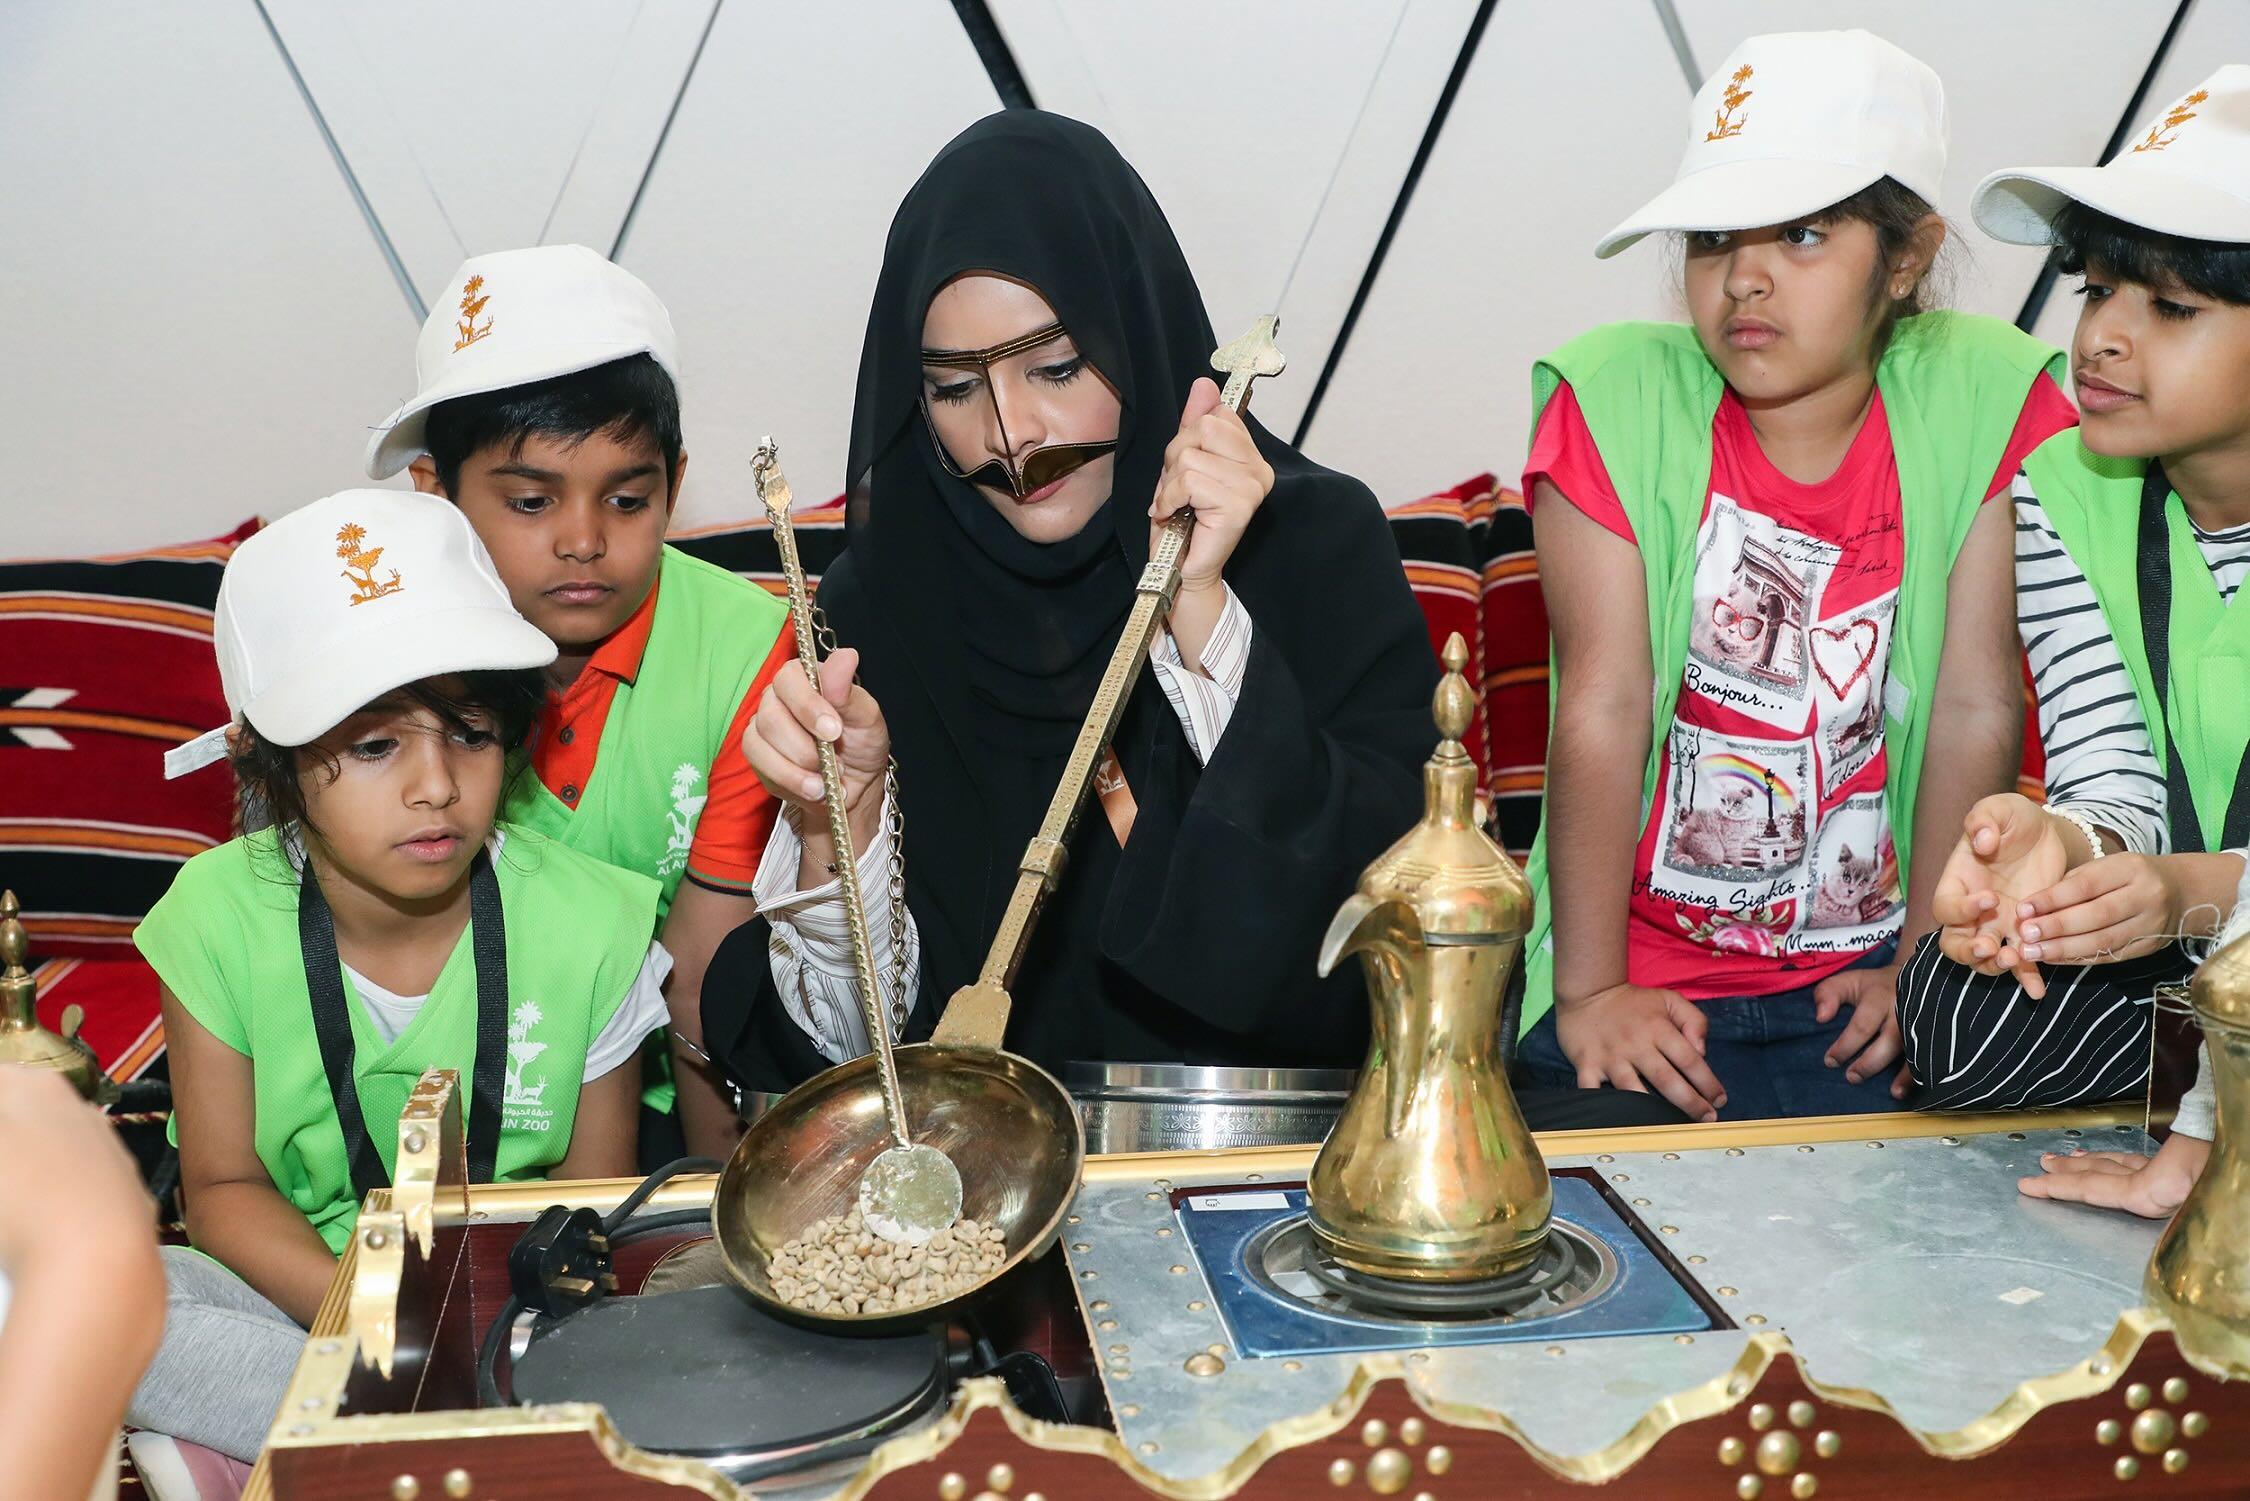 DAZ festival in Al Ain celebrates nature with forests, food and films